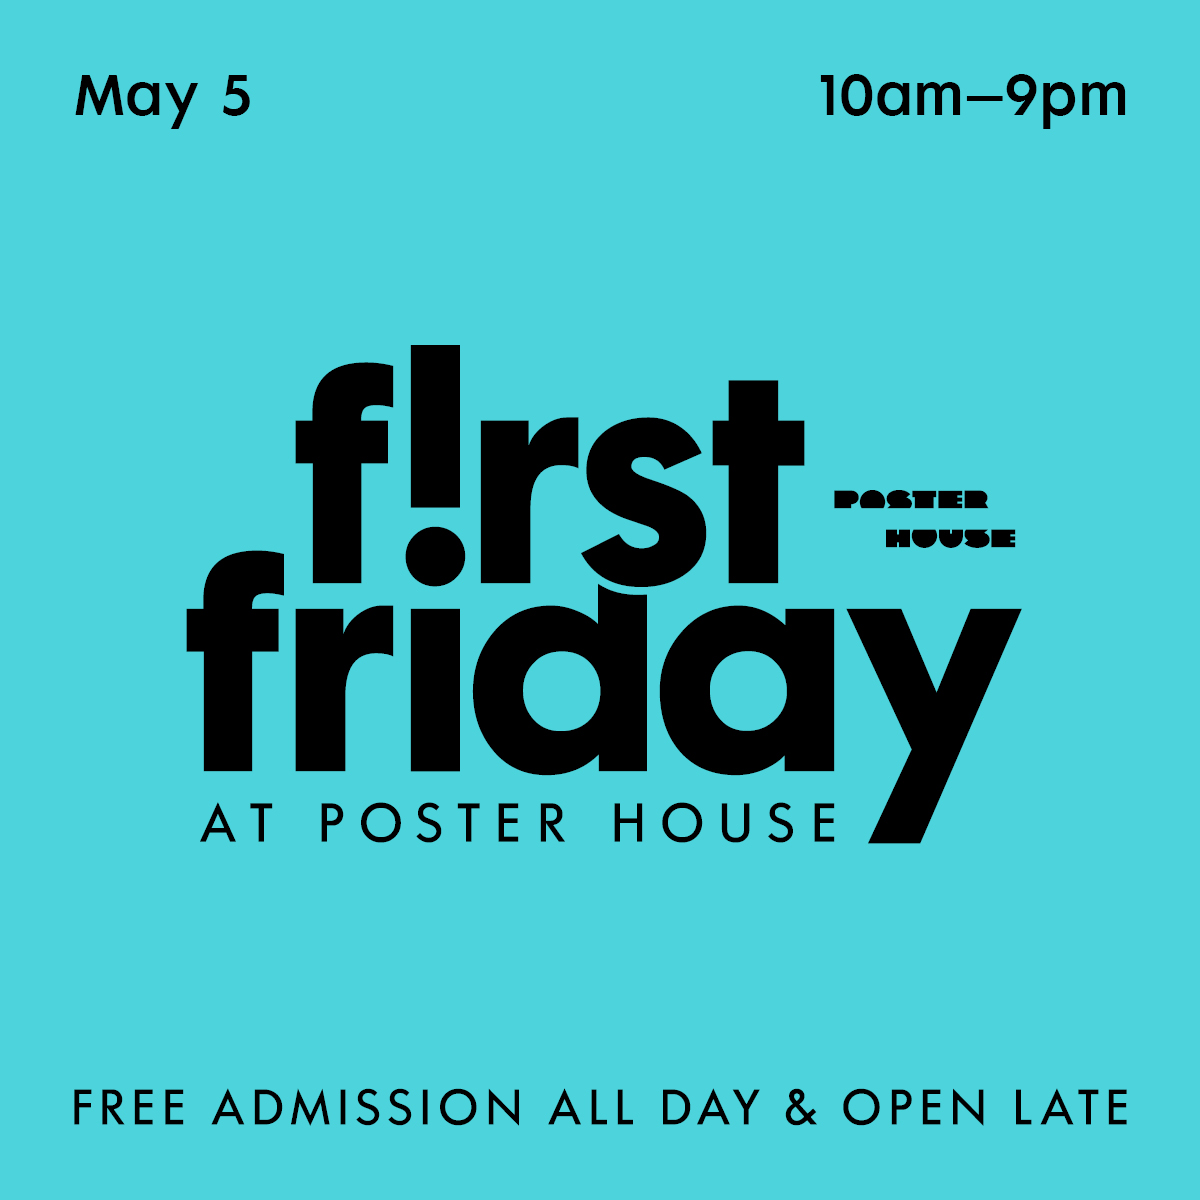 A turquoise text graphic advertising First Friday at Poster House on May 5